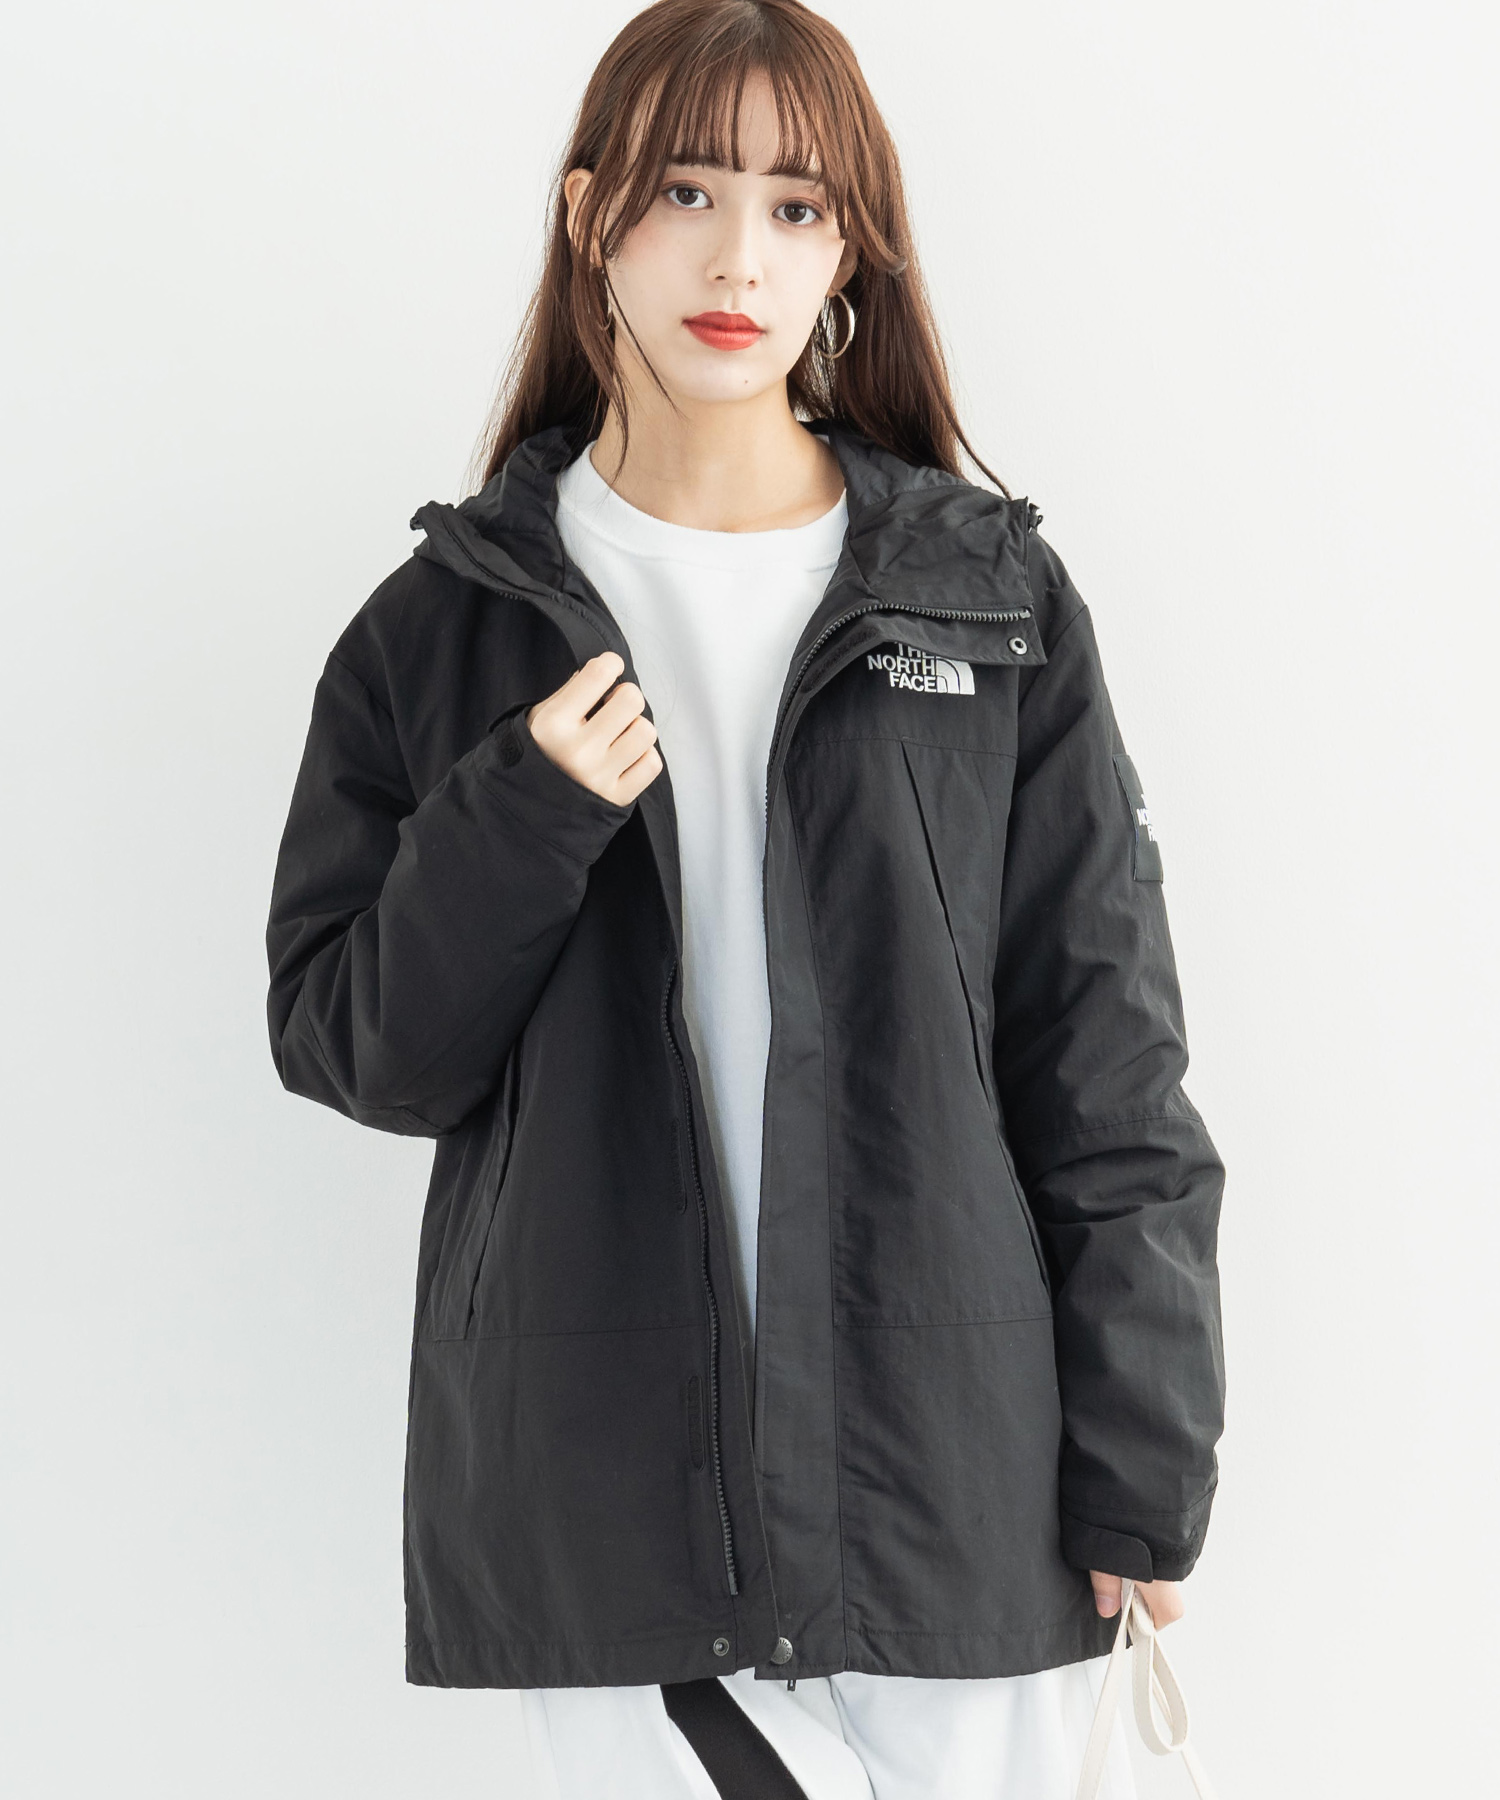 NORTH FACE WHITE LABEL NEO VAIDEN JACKET | kensysgas.com